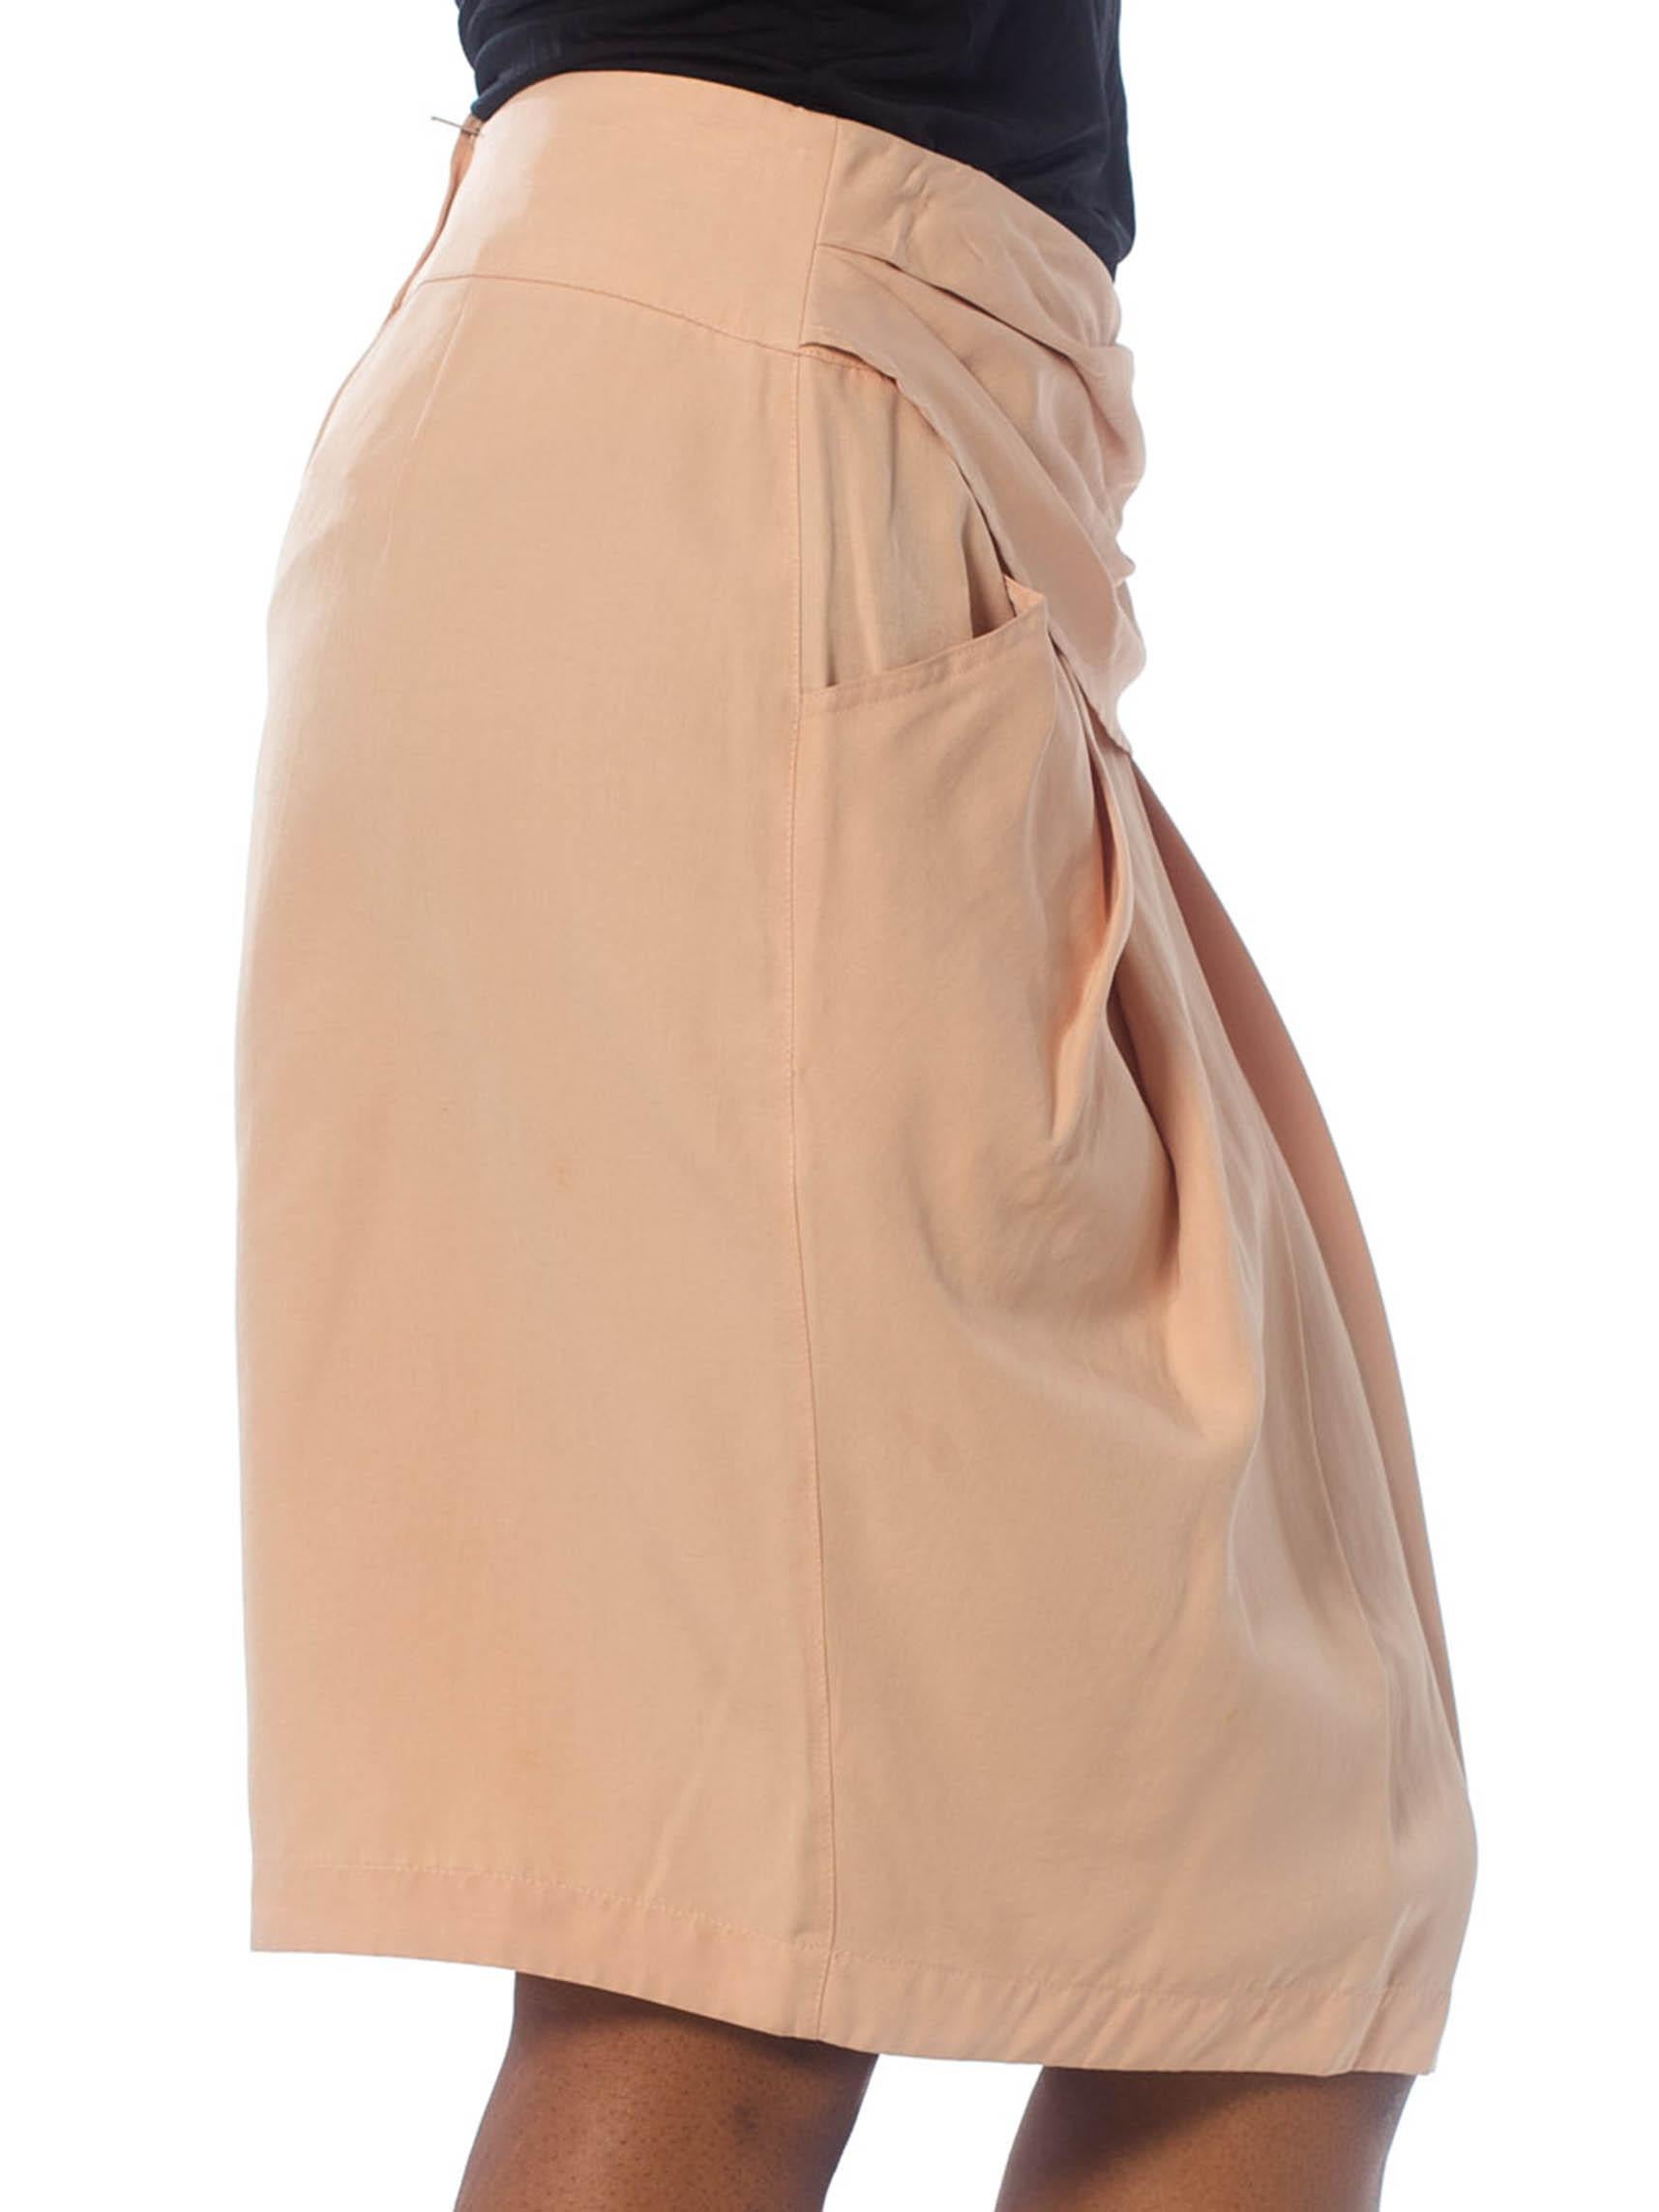 1980S BYBLOS Blush Pink Silk Faille Skirt With Draped Waist & Pockets In Excellent Condition For Sale In New York, NY